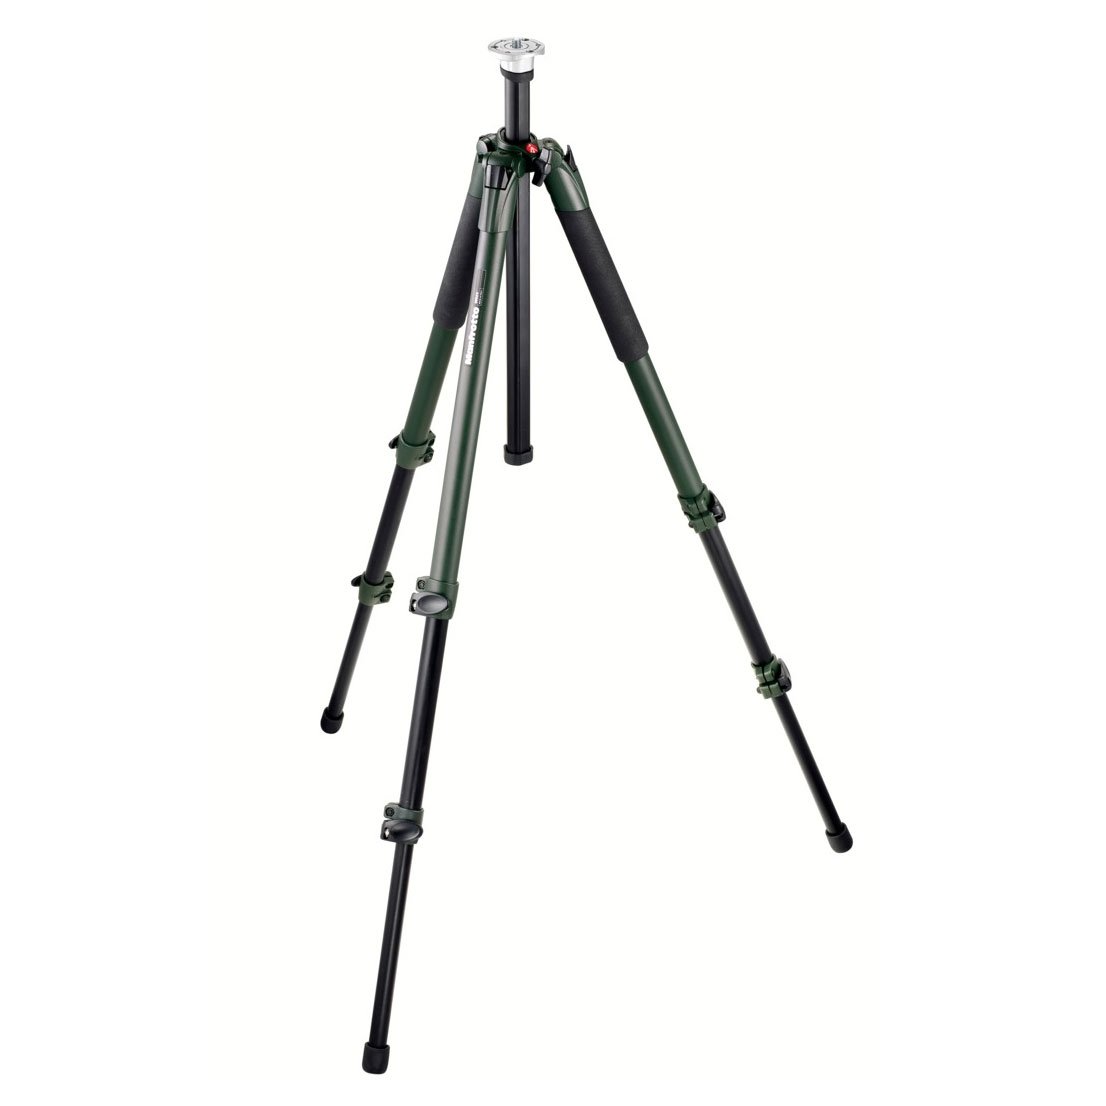 Identify your {brand} tripod to find a replacement part